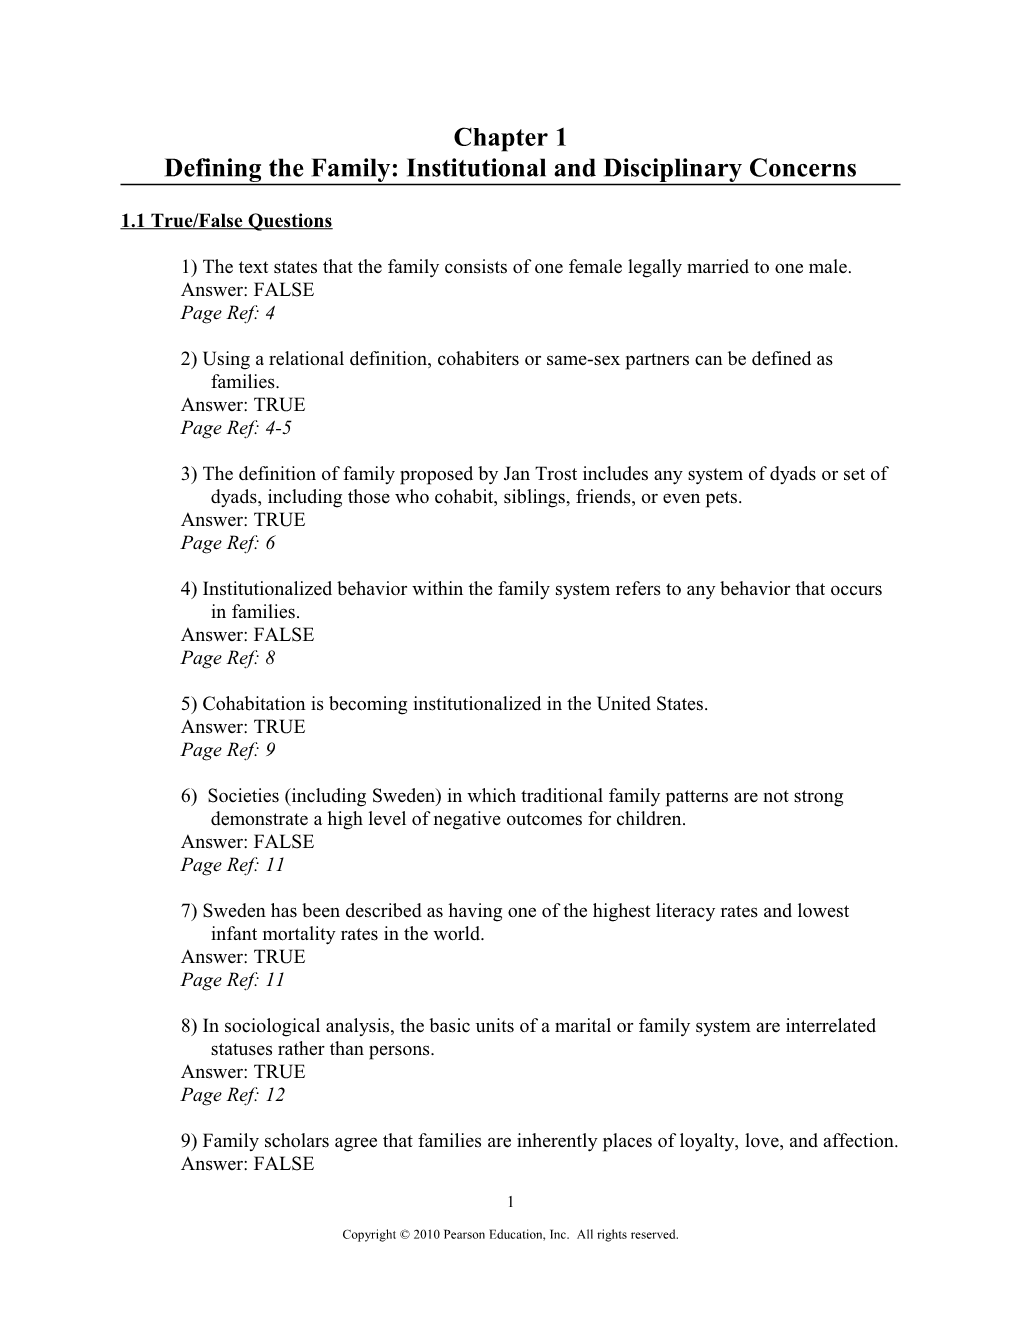 Defining the Family: Institutional and Disciplinary Concerns